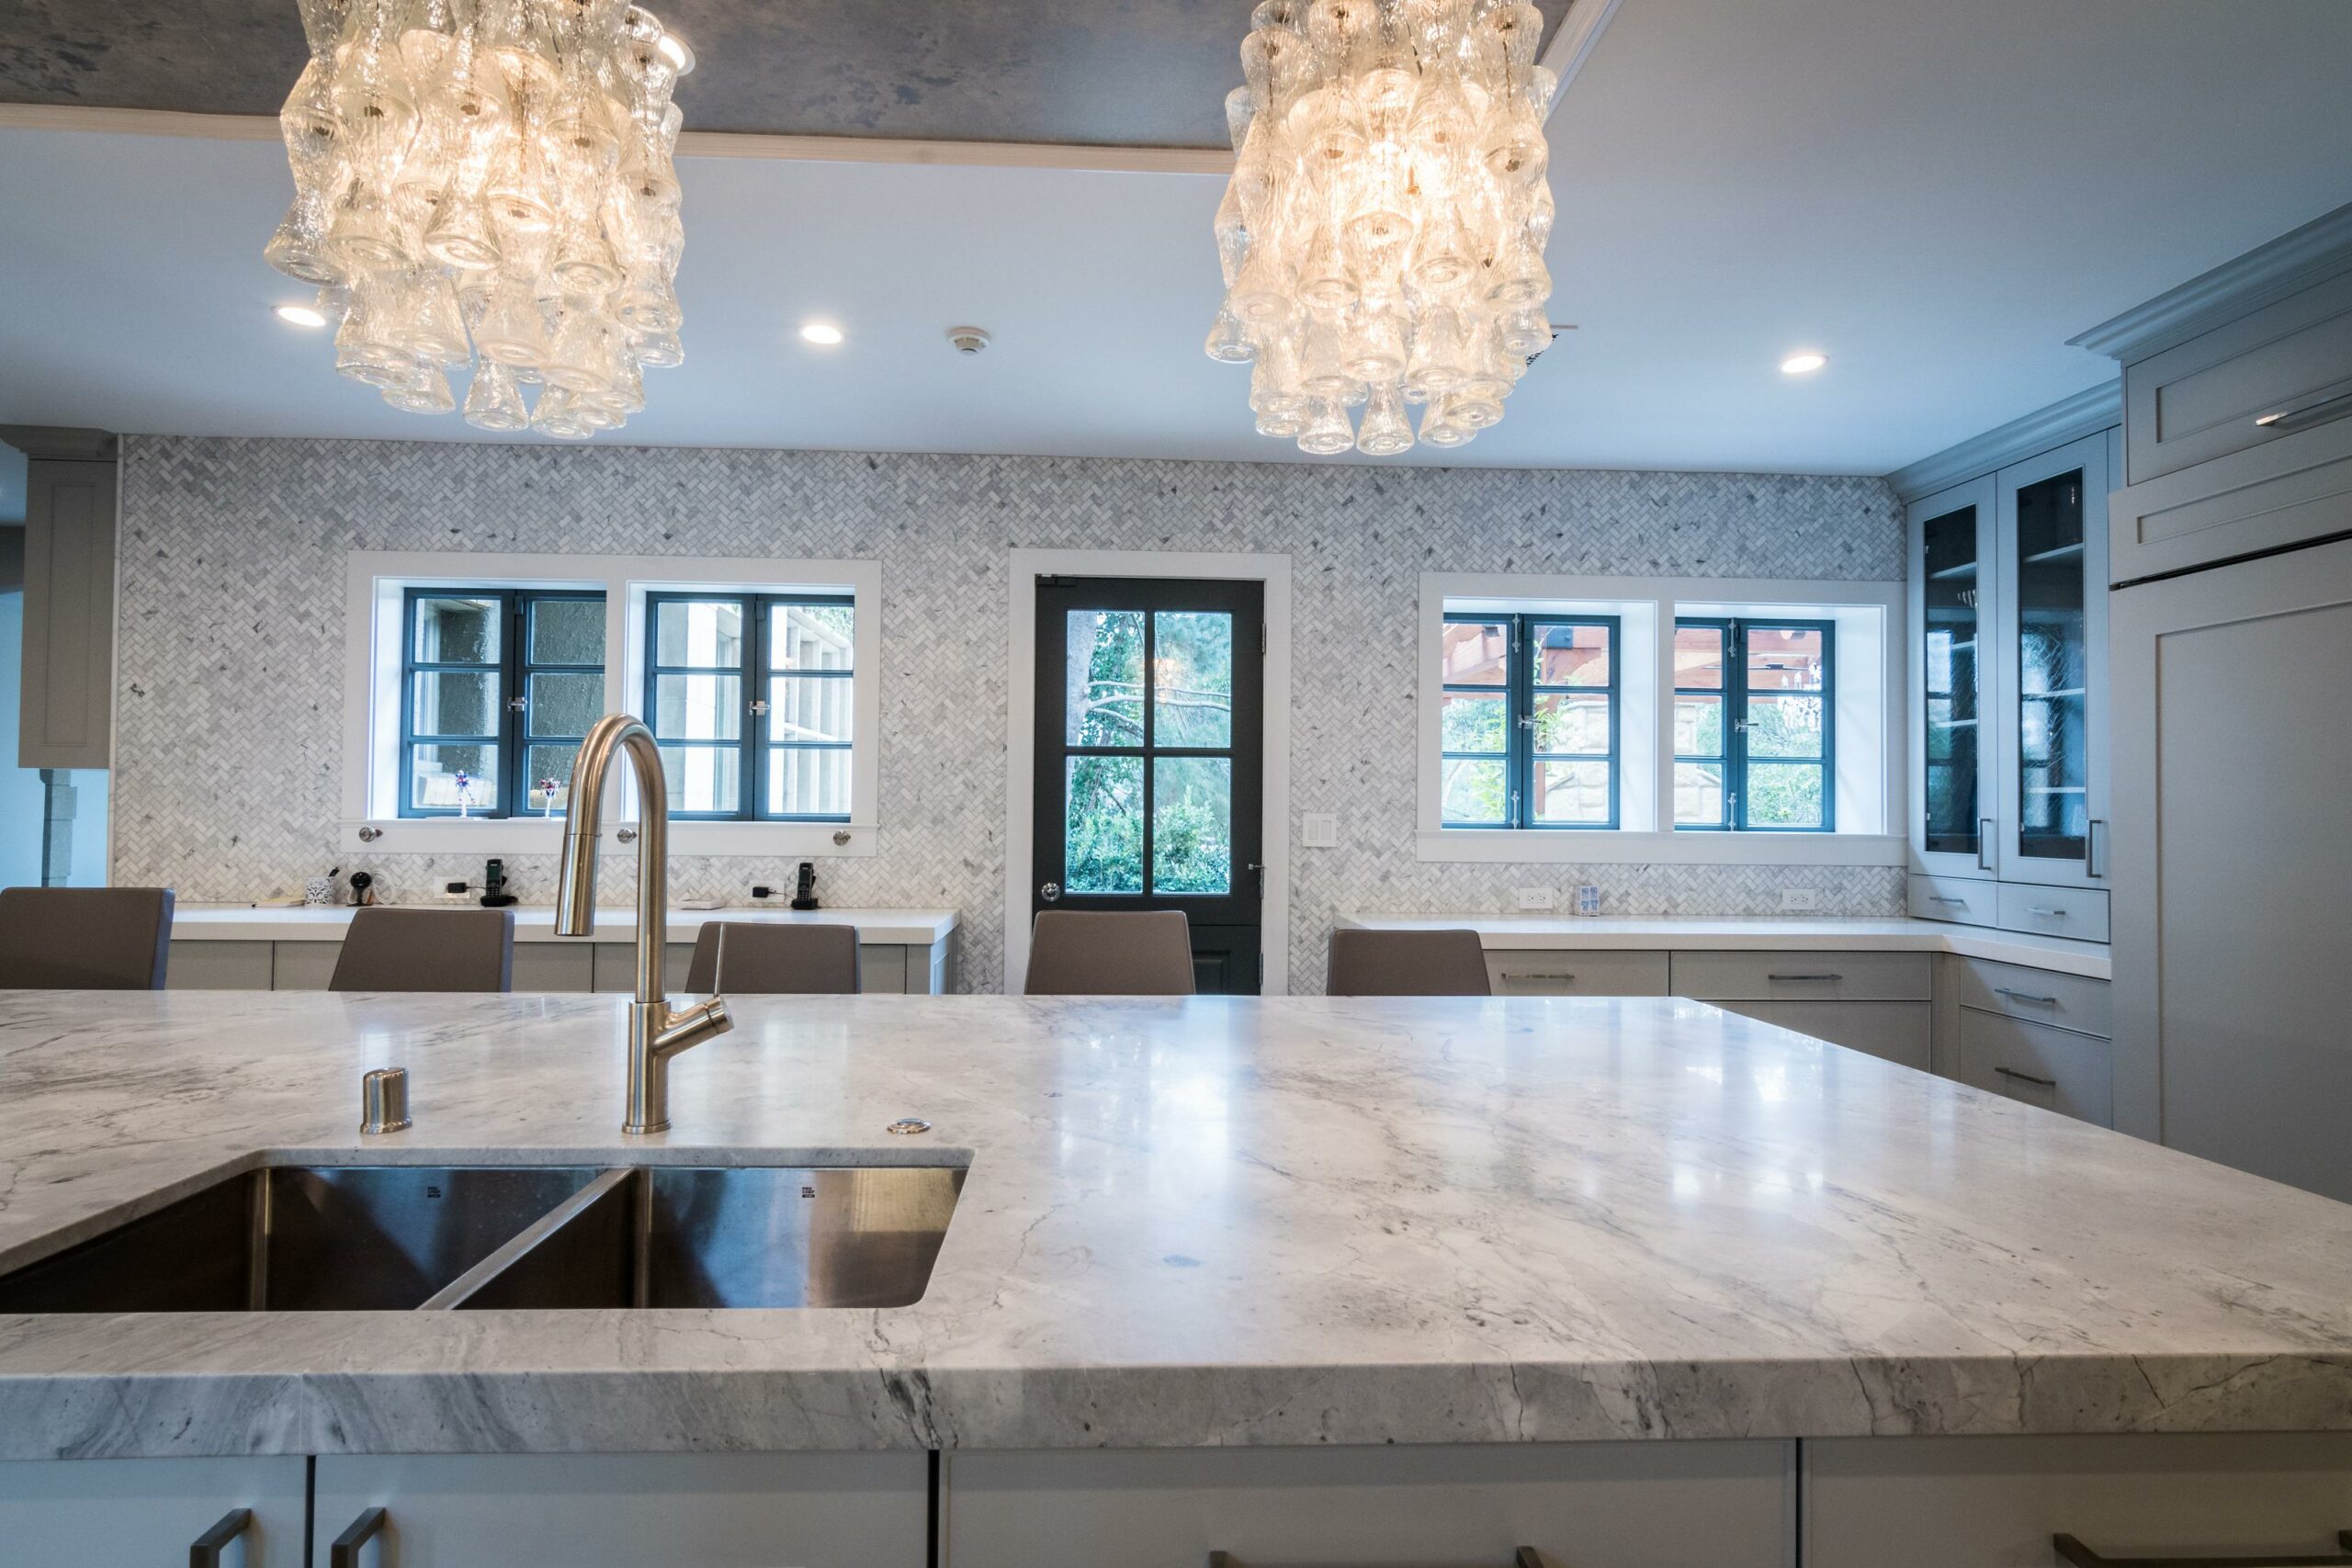 Modern kitchen with marble countertops and chandelier.